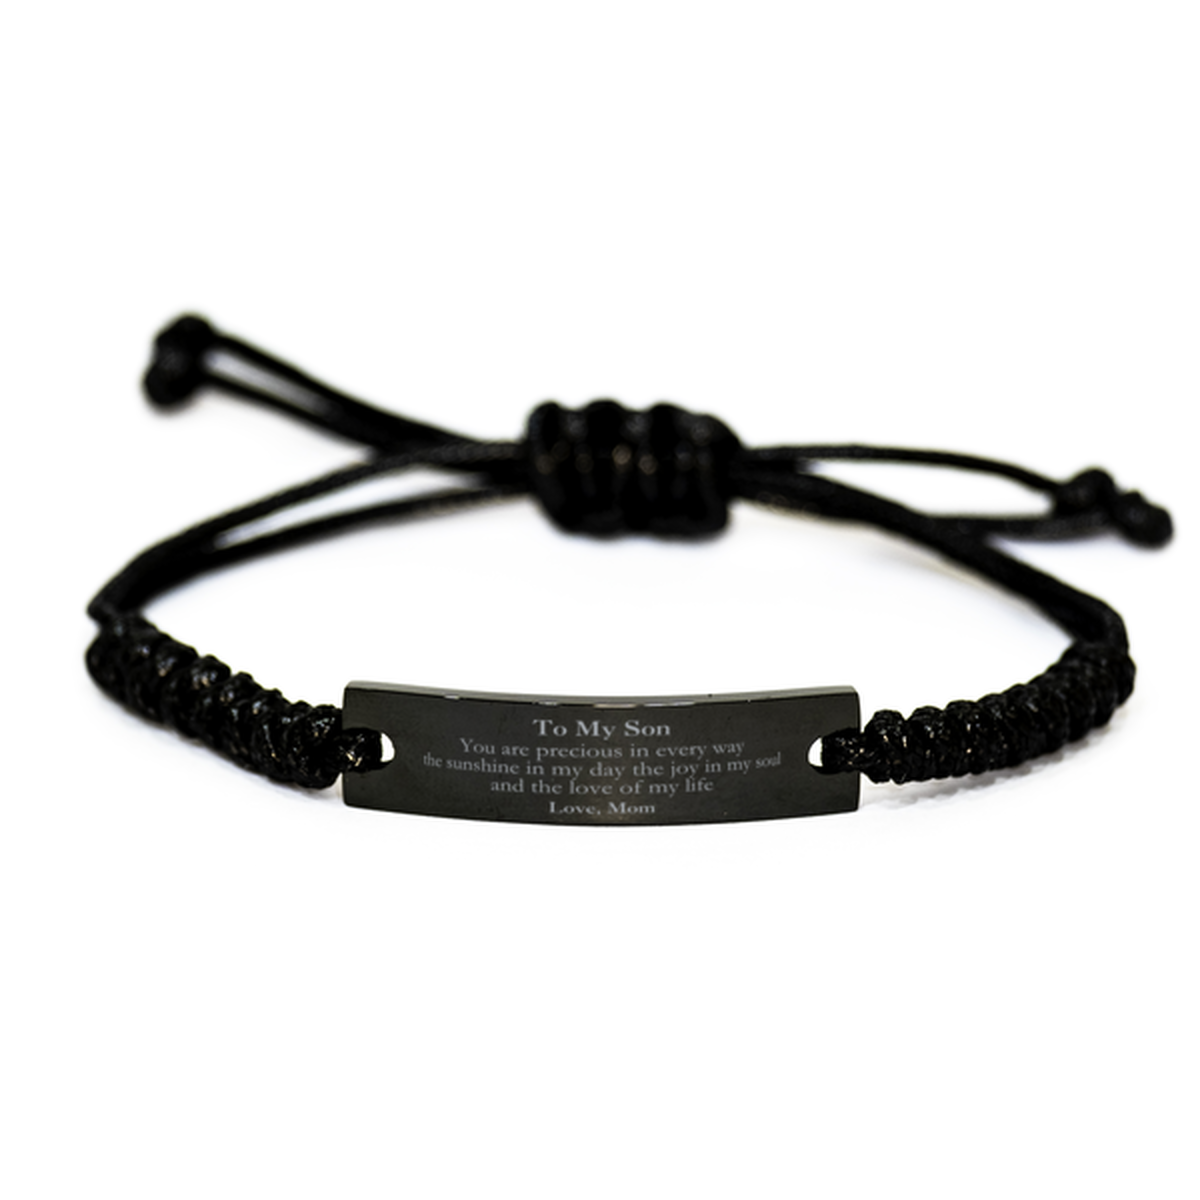 Graduation Gifts for Son Black Rope Bracelet Present from Mom, Christmas Son Birthday Gifts Son You are precious in every way the sunshine in my day. Love, Mom